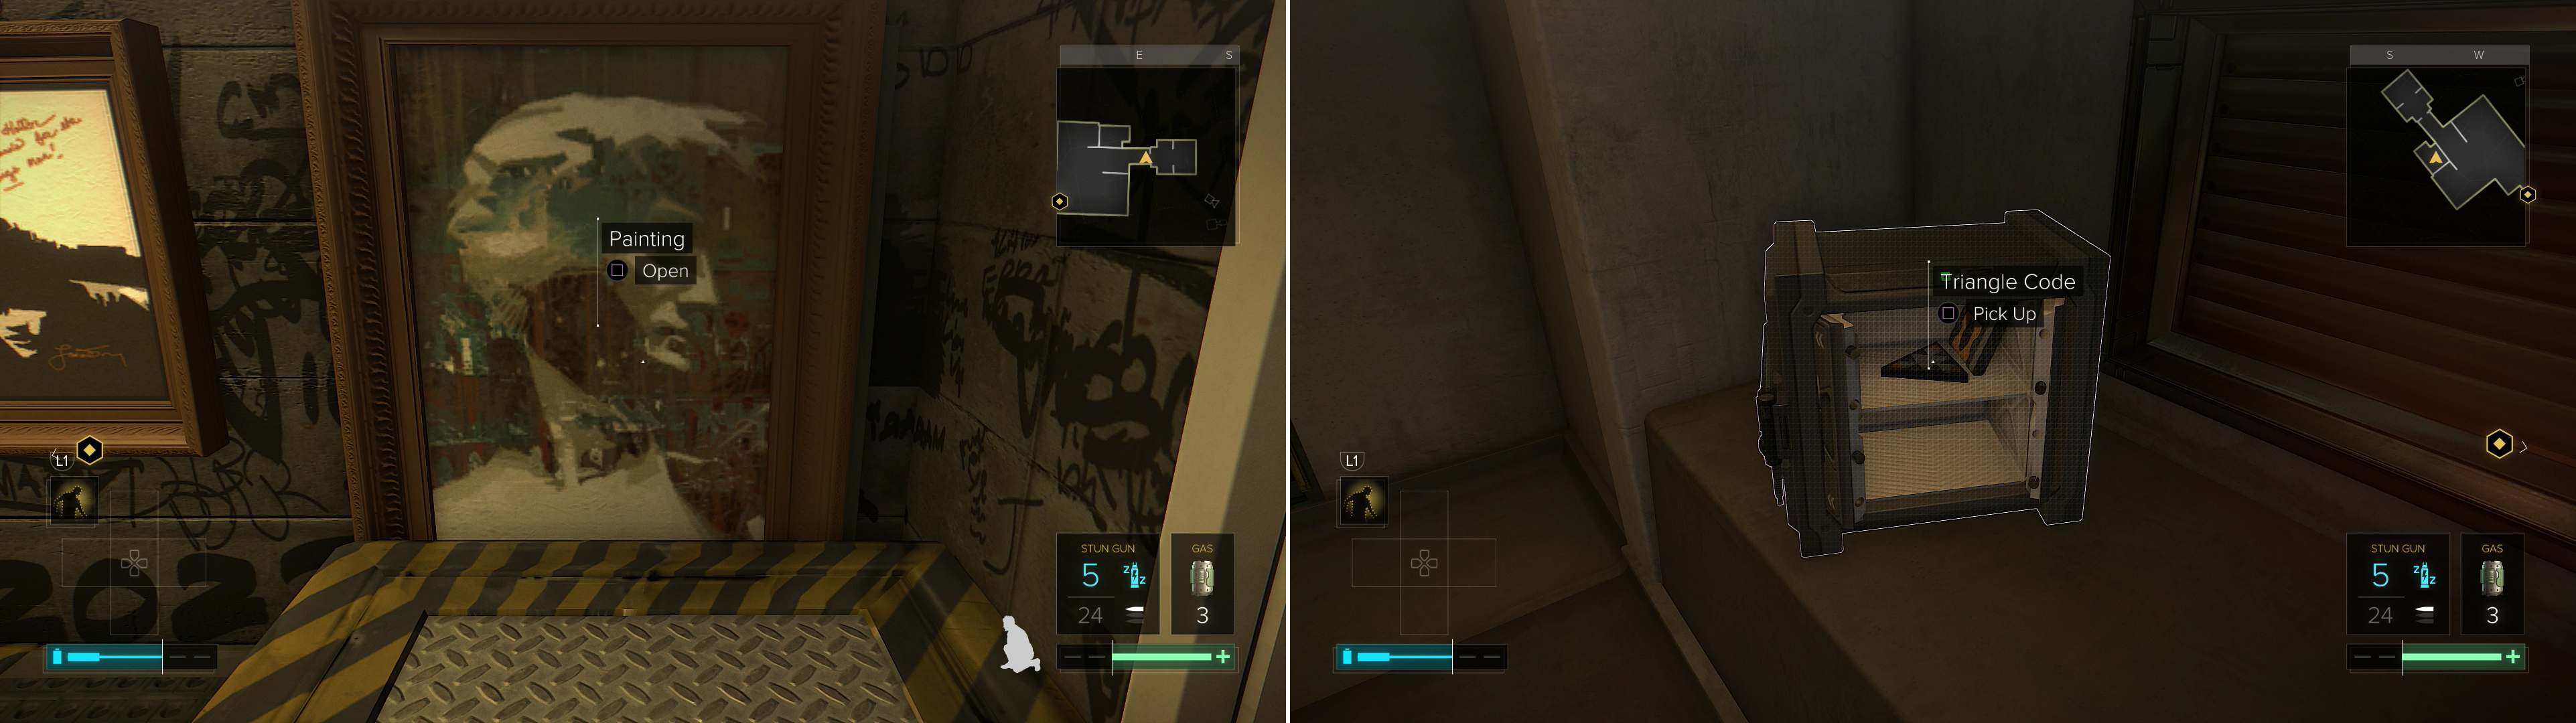 Move a painting out of the way and enter a gas-filled chamber beyond (left). Gain access to Koller’s safe to score a Praxis Kit (right).